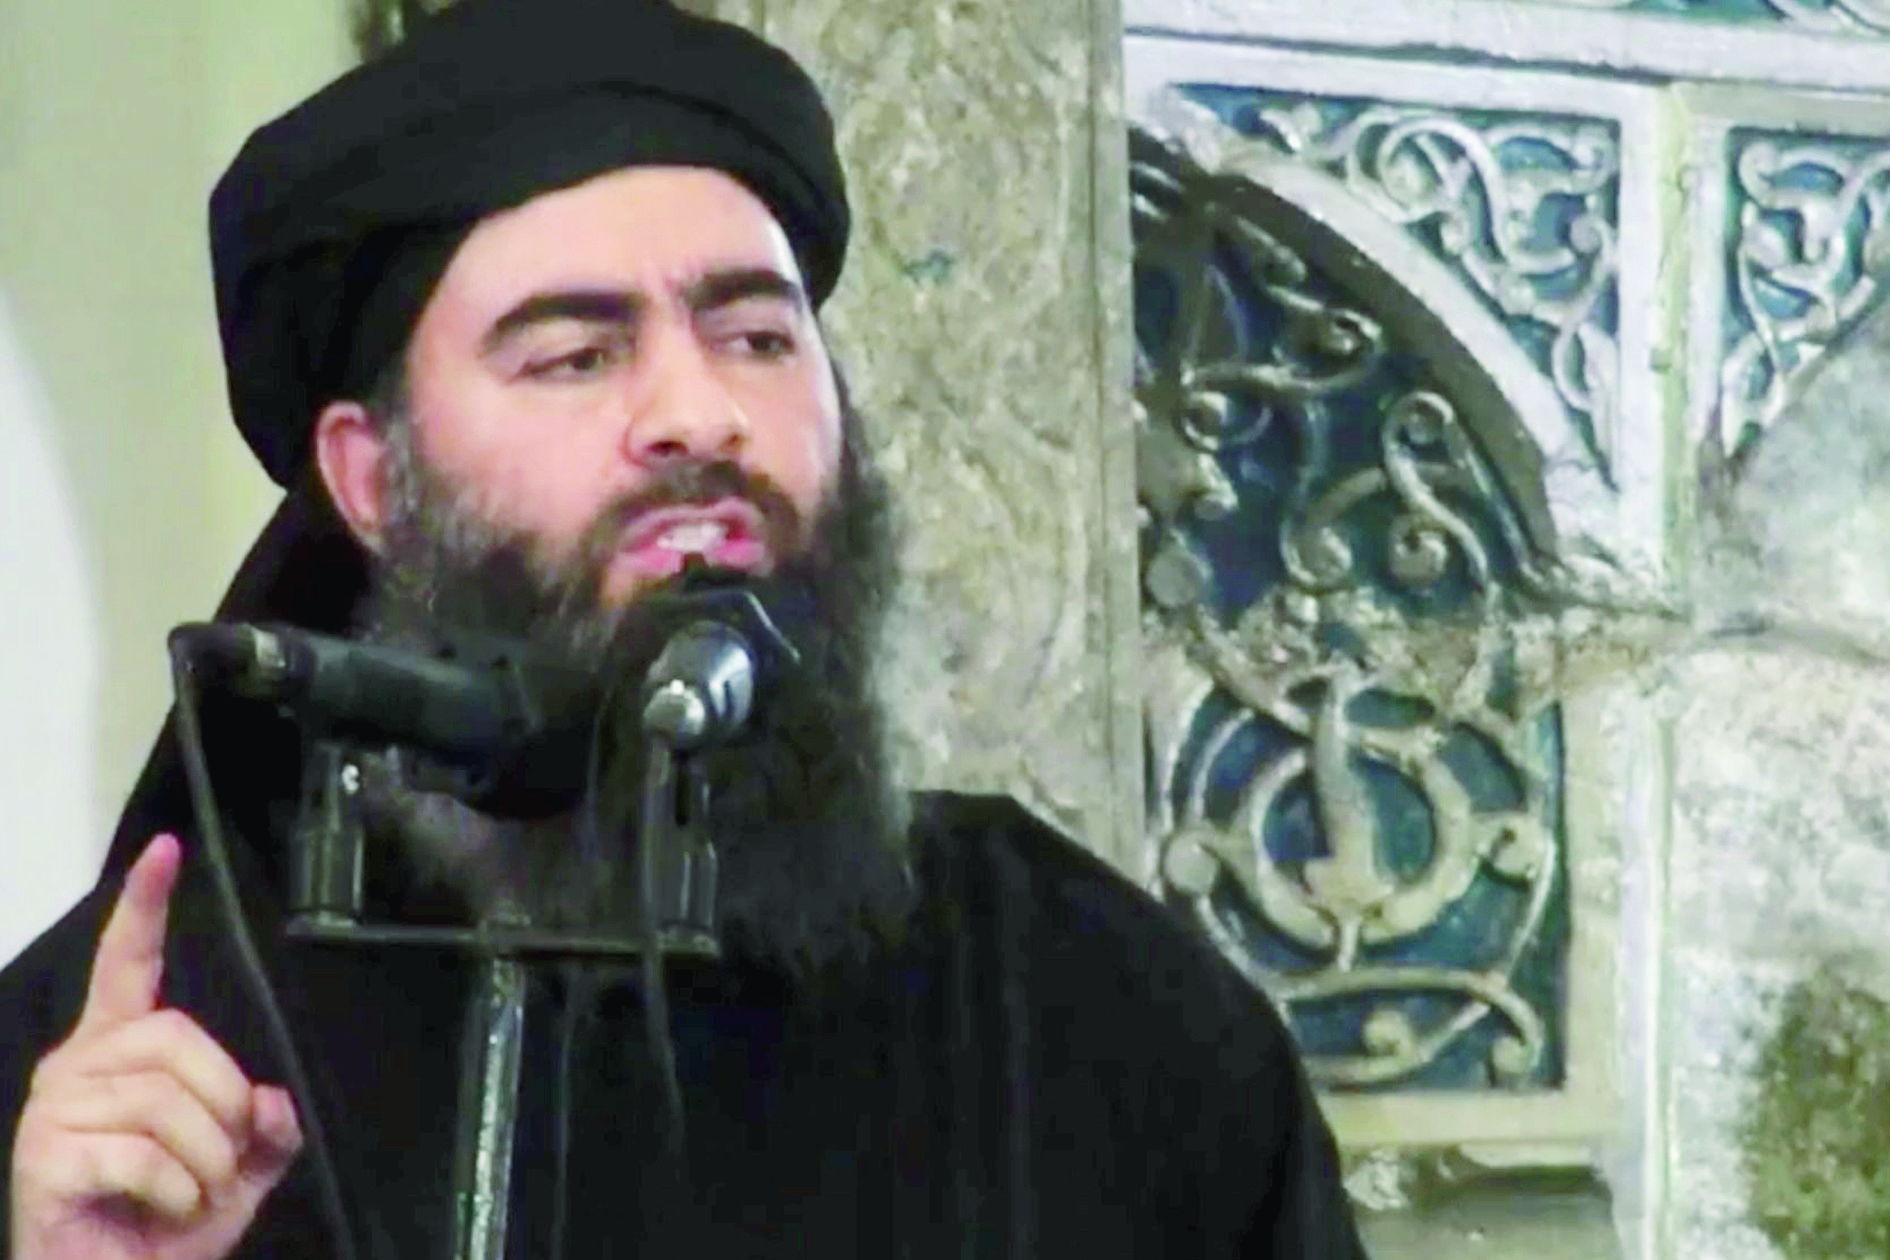 FILE - This file image made from video posted on a militant website July 5, 2014, purports to show the leader of the Islamic State group, Abu Bakr al-Baghdadi, delivering a sermon at a mosque in Iraq during his first public appearance. Islamic State group leader Abu Bakr al-Baghdadi appears to be still alive, a top U.S. military commander said Thursday, Aug. 31, 2017, contradicting RussiaÄôs claims that it probably killed the top counterterror target months ago.(Militant video via AP, File) UNITED STATES ISLAMIC STATE